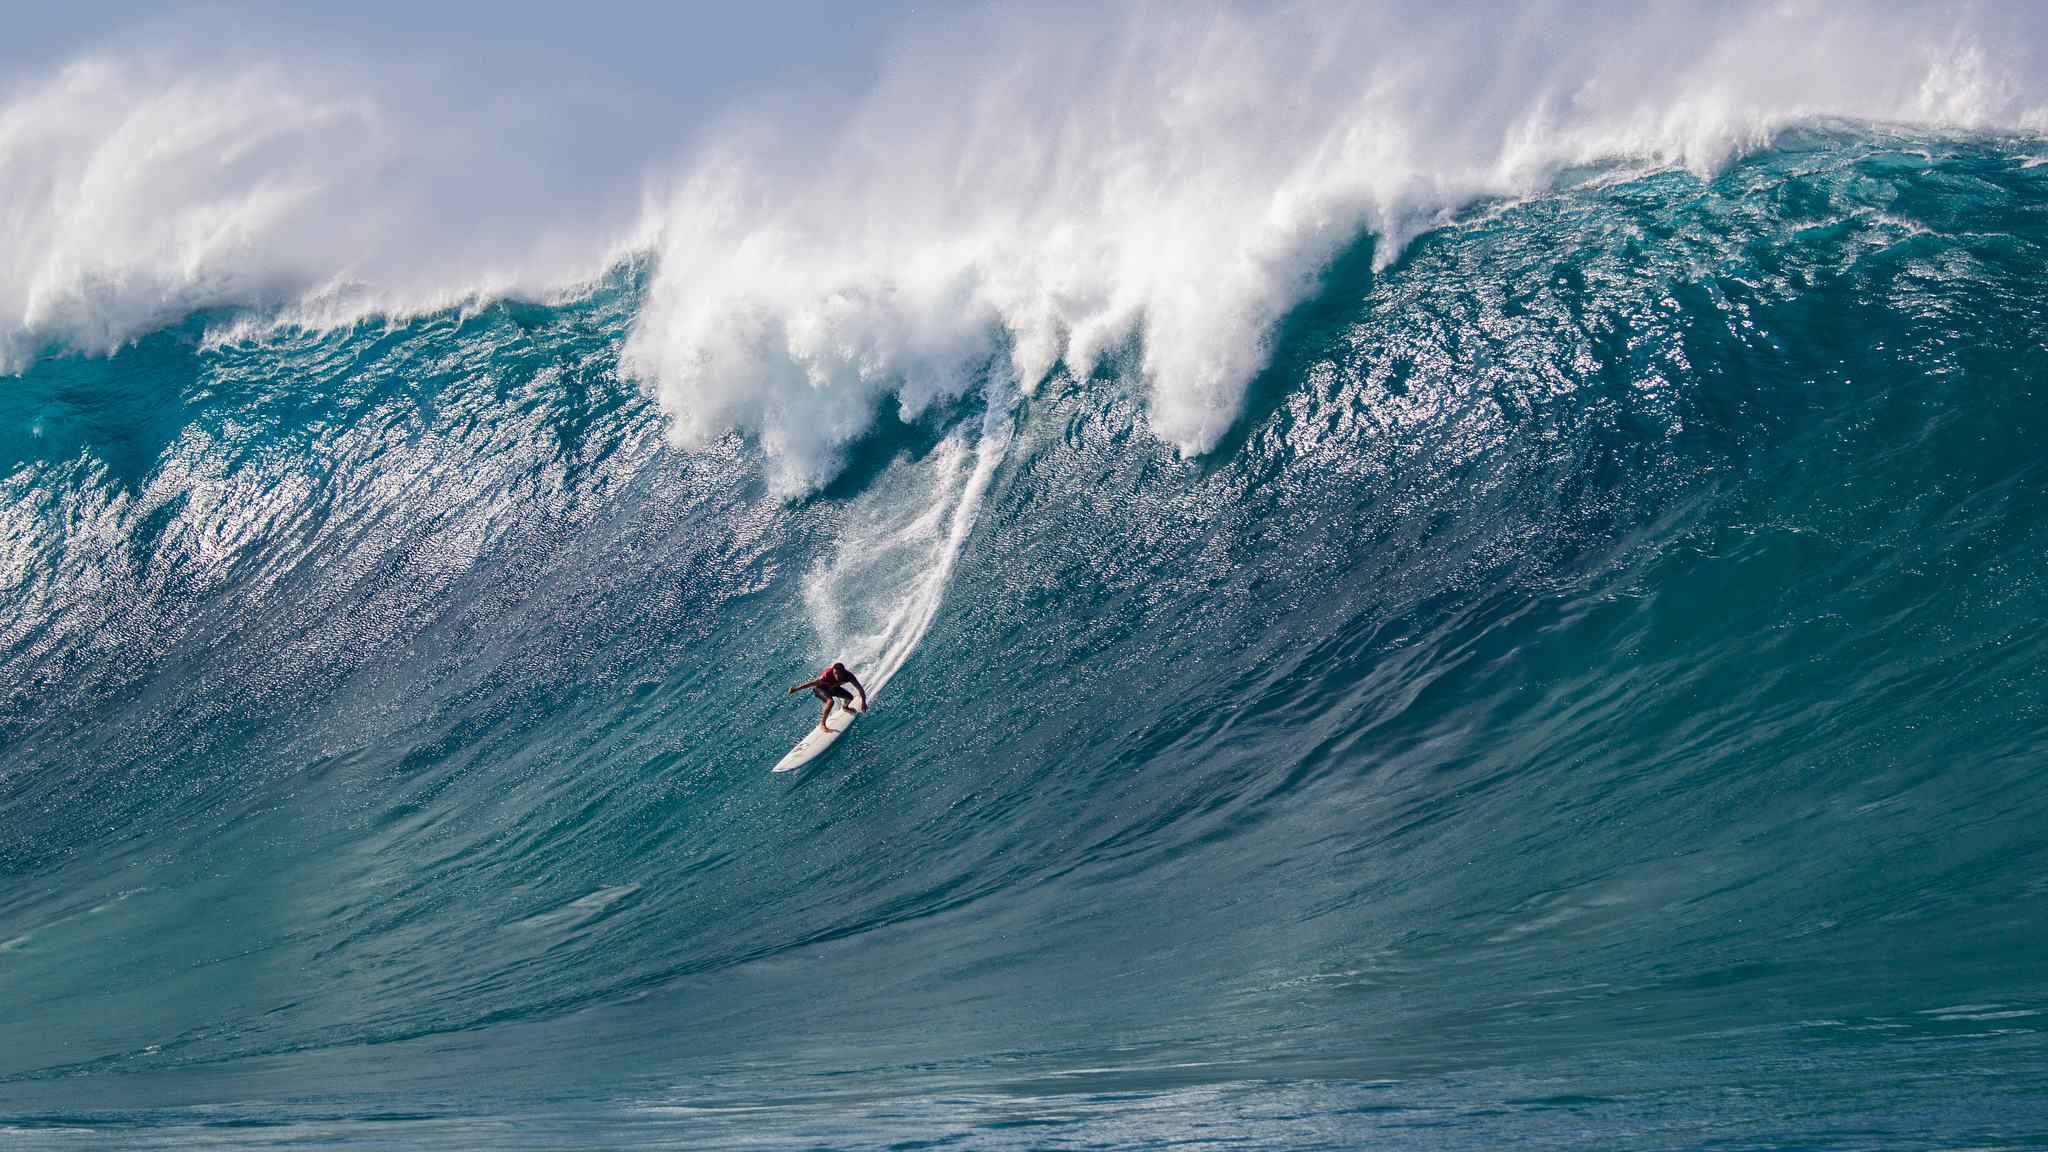 A massive swell at Jaws